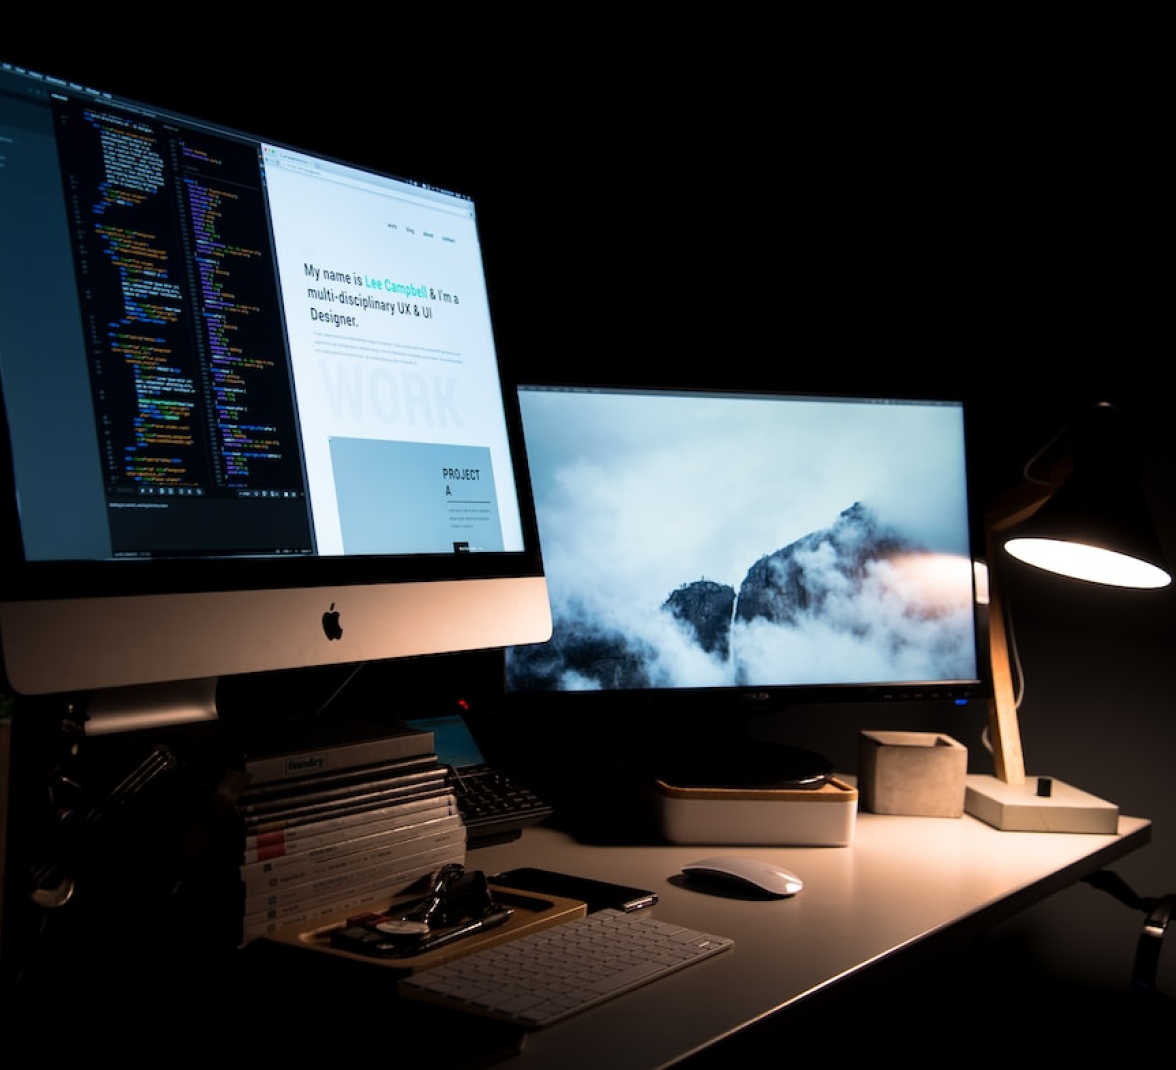 Two computer monitors are sitting on a desk in a dark room.